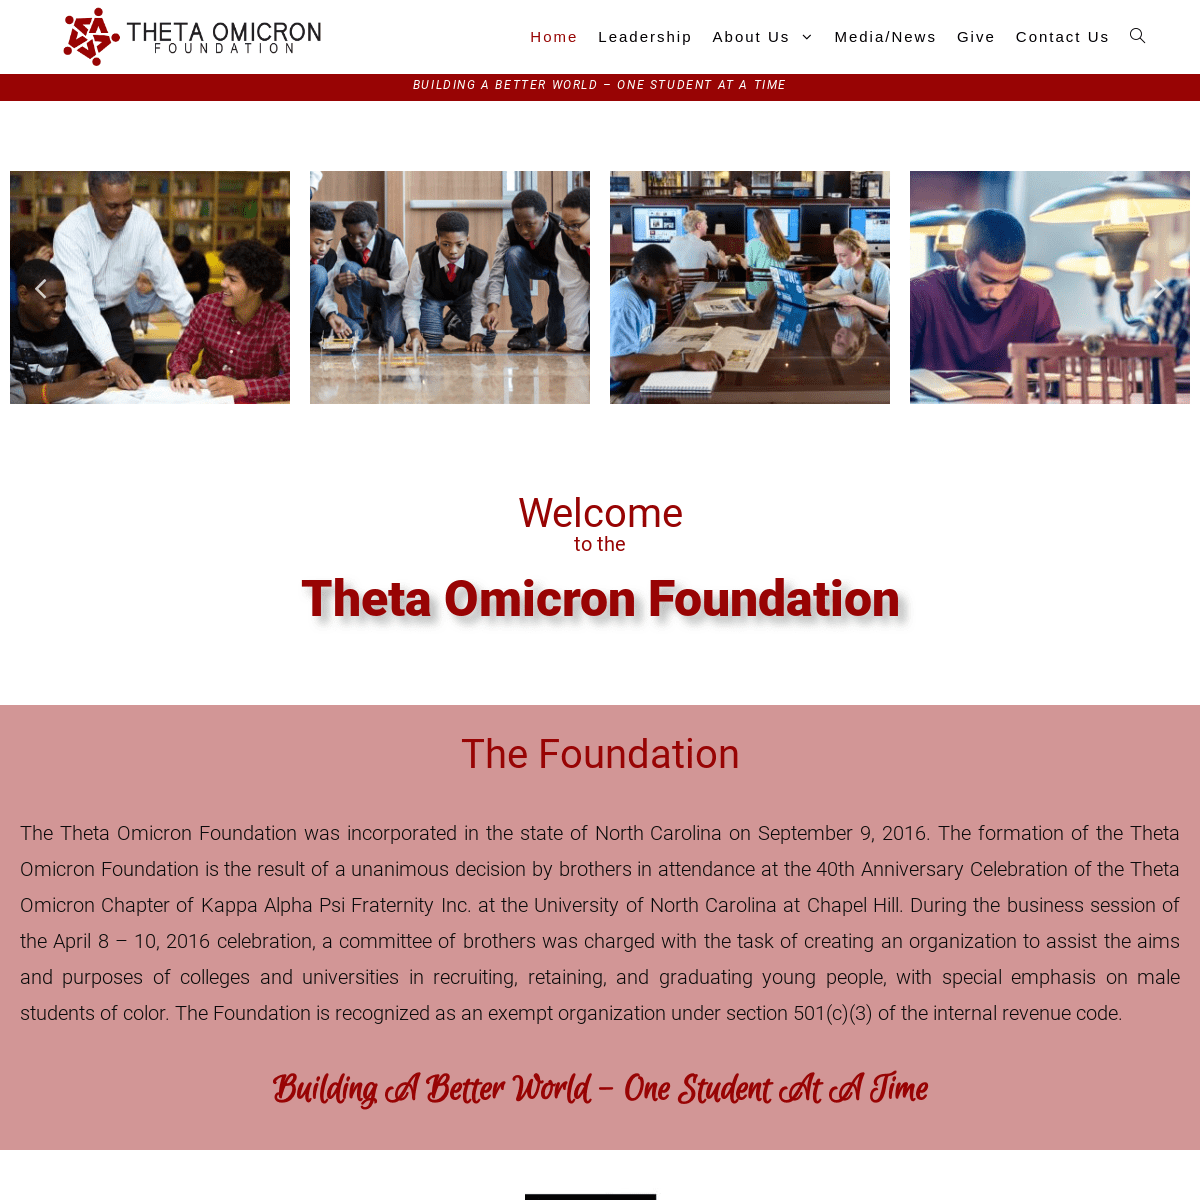 A complete backup of thetaomicronfoundation.org